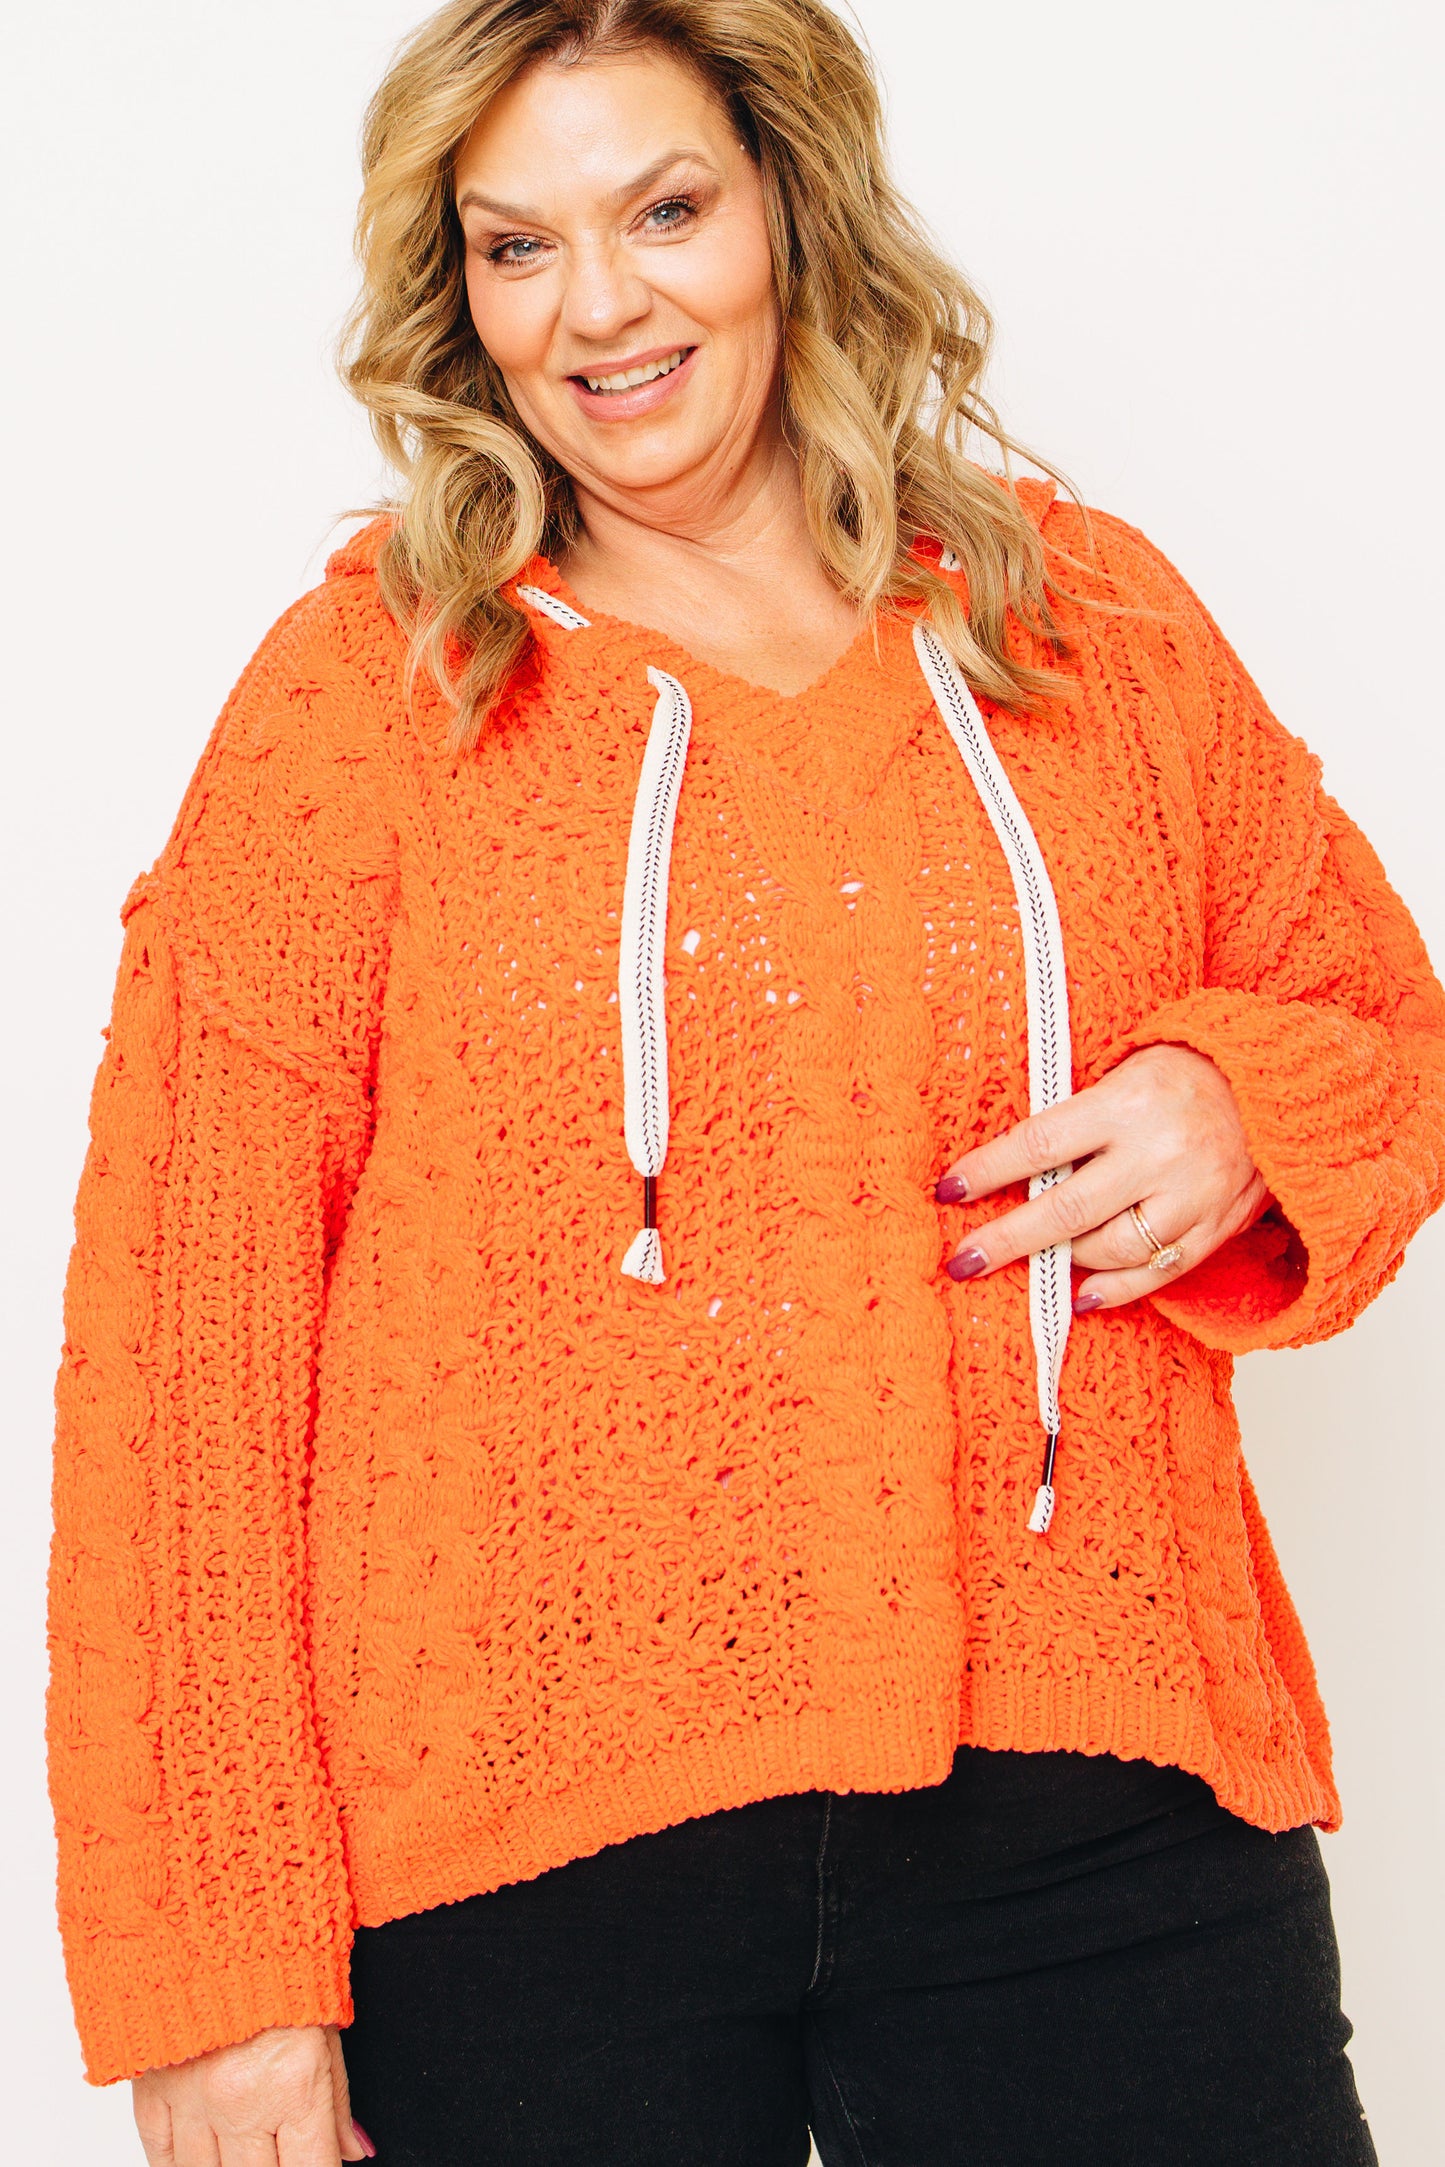 Pol - Forever Vibrant Cable Knit Sweater  (S-L)